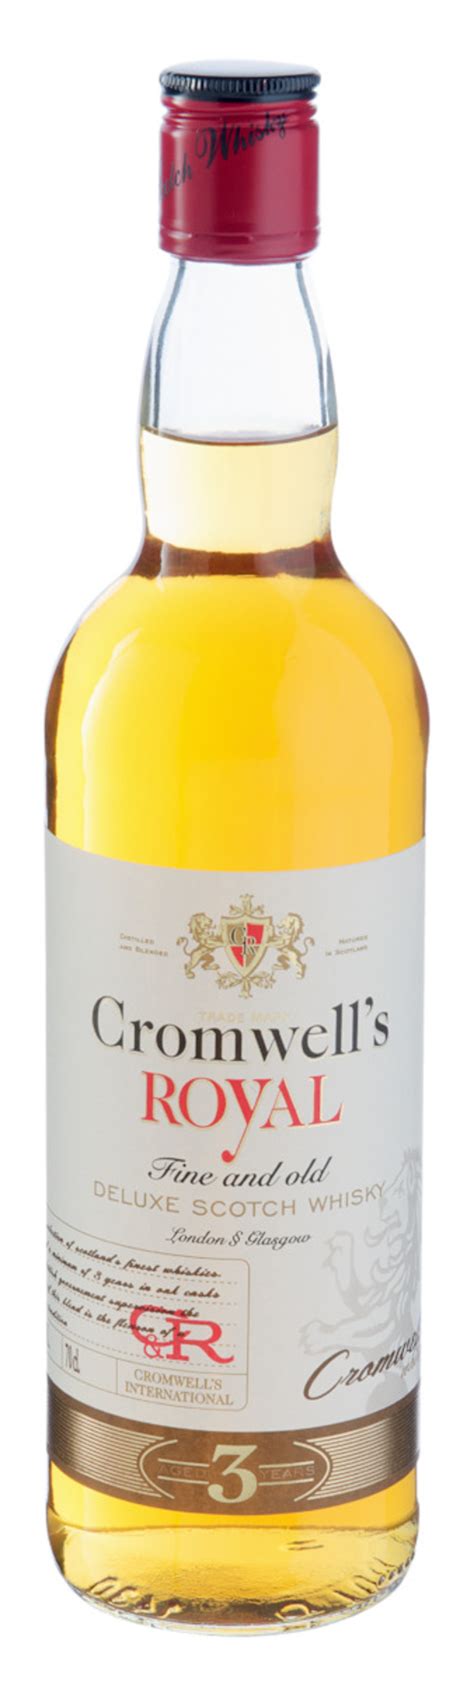 Cromwells. Cromwell died on 3 September 1658, aged 59. His death was due to complications relating to a form of malaria, and kidney stone disease. It is thought that his death was quickened by the death of his daughter a month earlier. Cromwell appointed his son, Richard as his successor. 